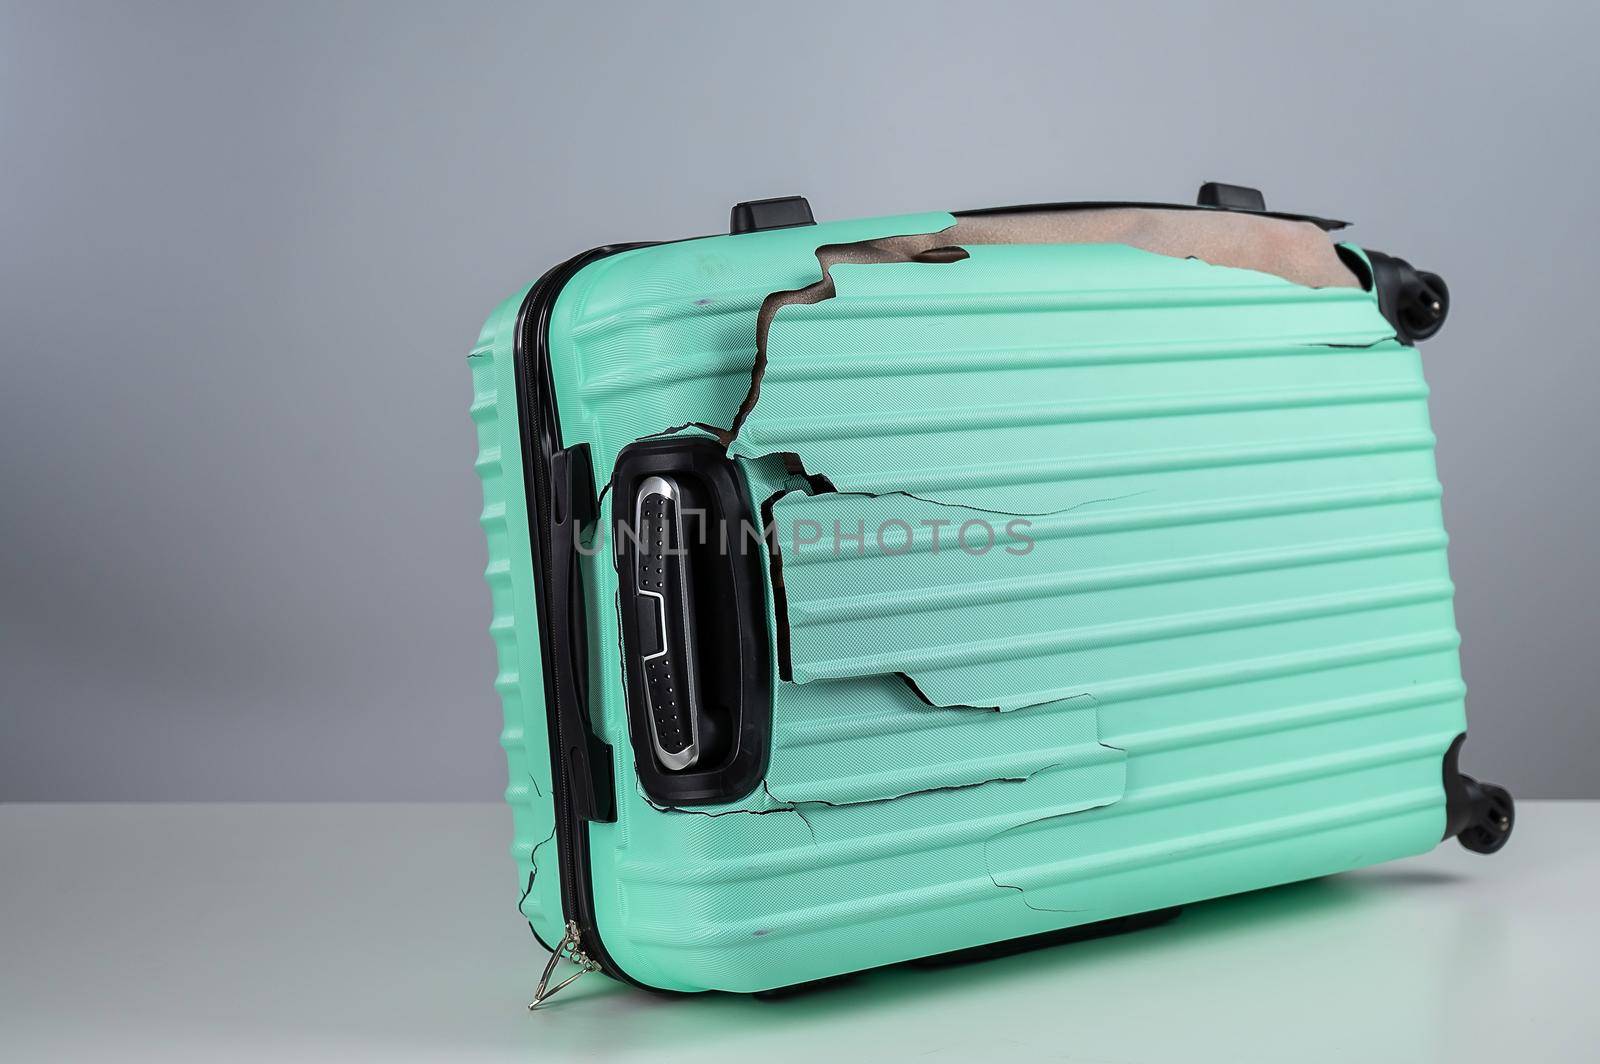 Mint damaged suitcase on a white background. by mrwed54